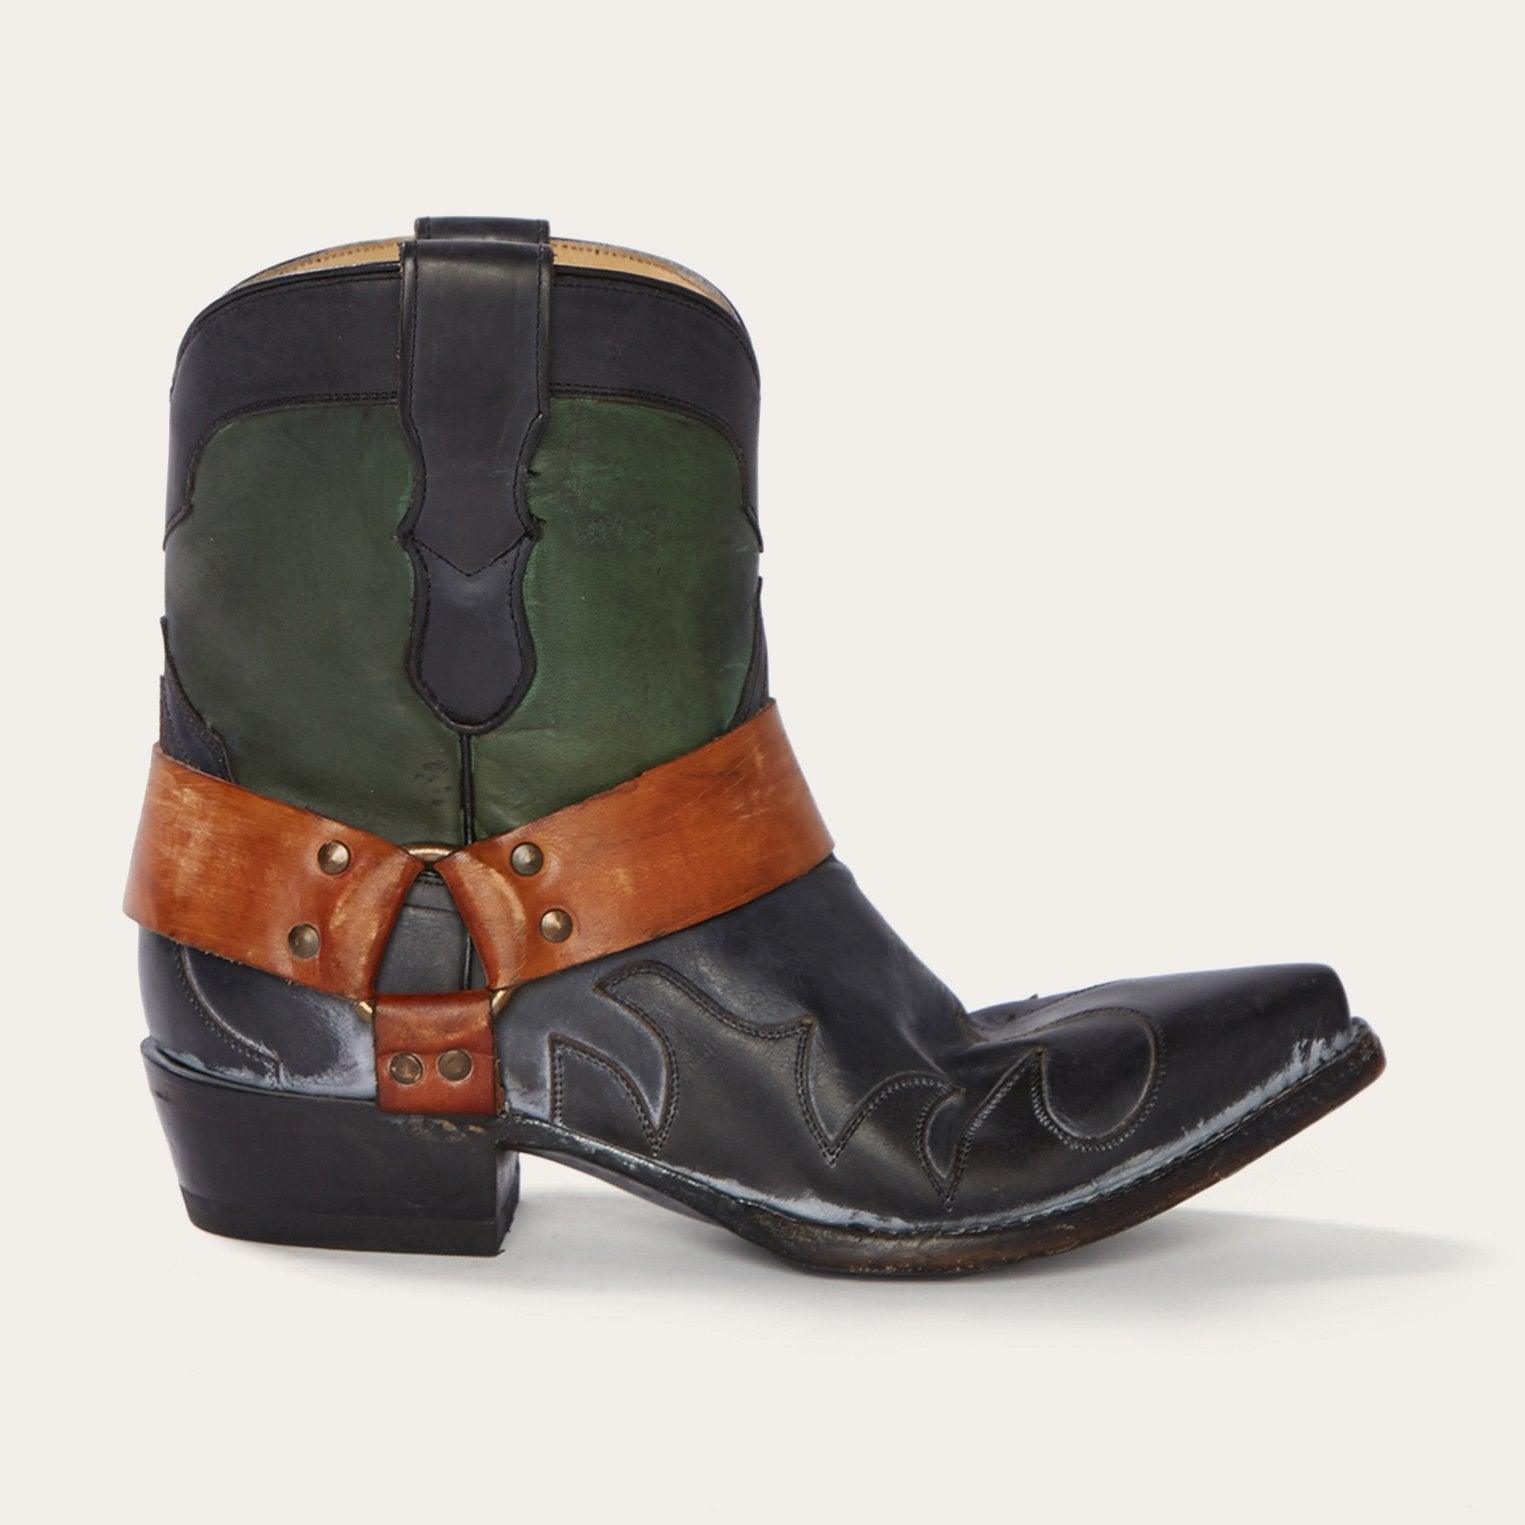 Stetson Jade Harness Ankle Boot - Flyclothing LLC